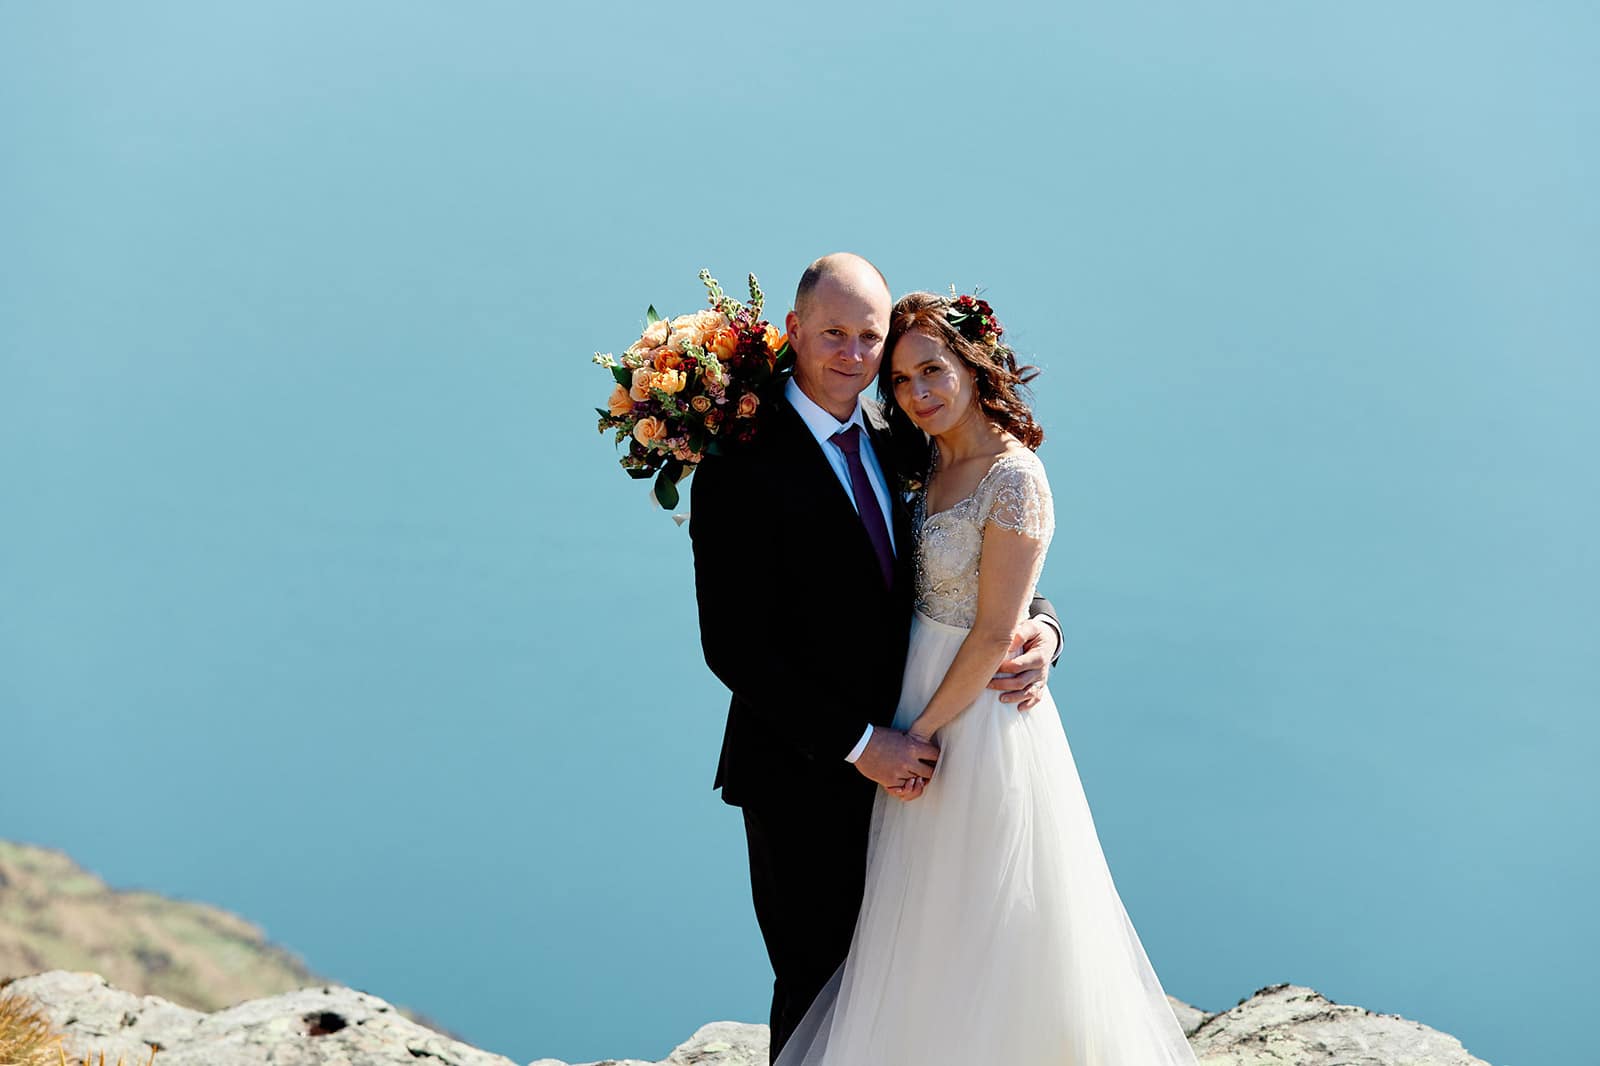 Heli Wedding Photography on The Ledge in Queenstown